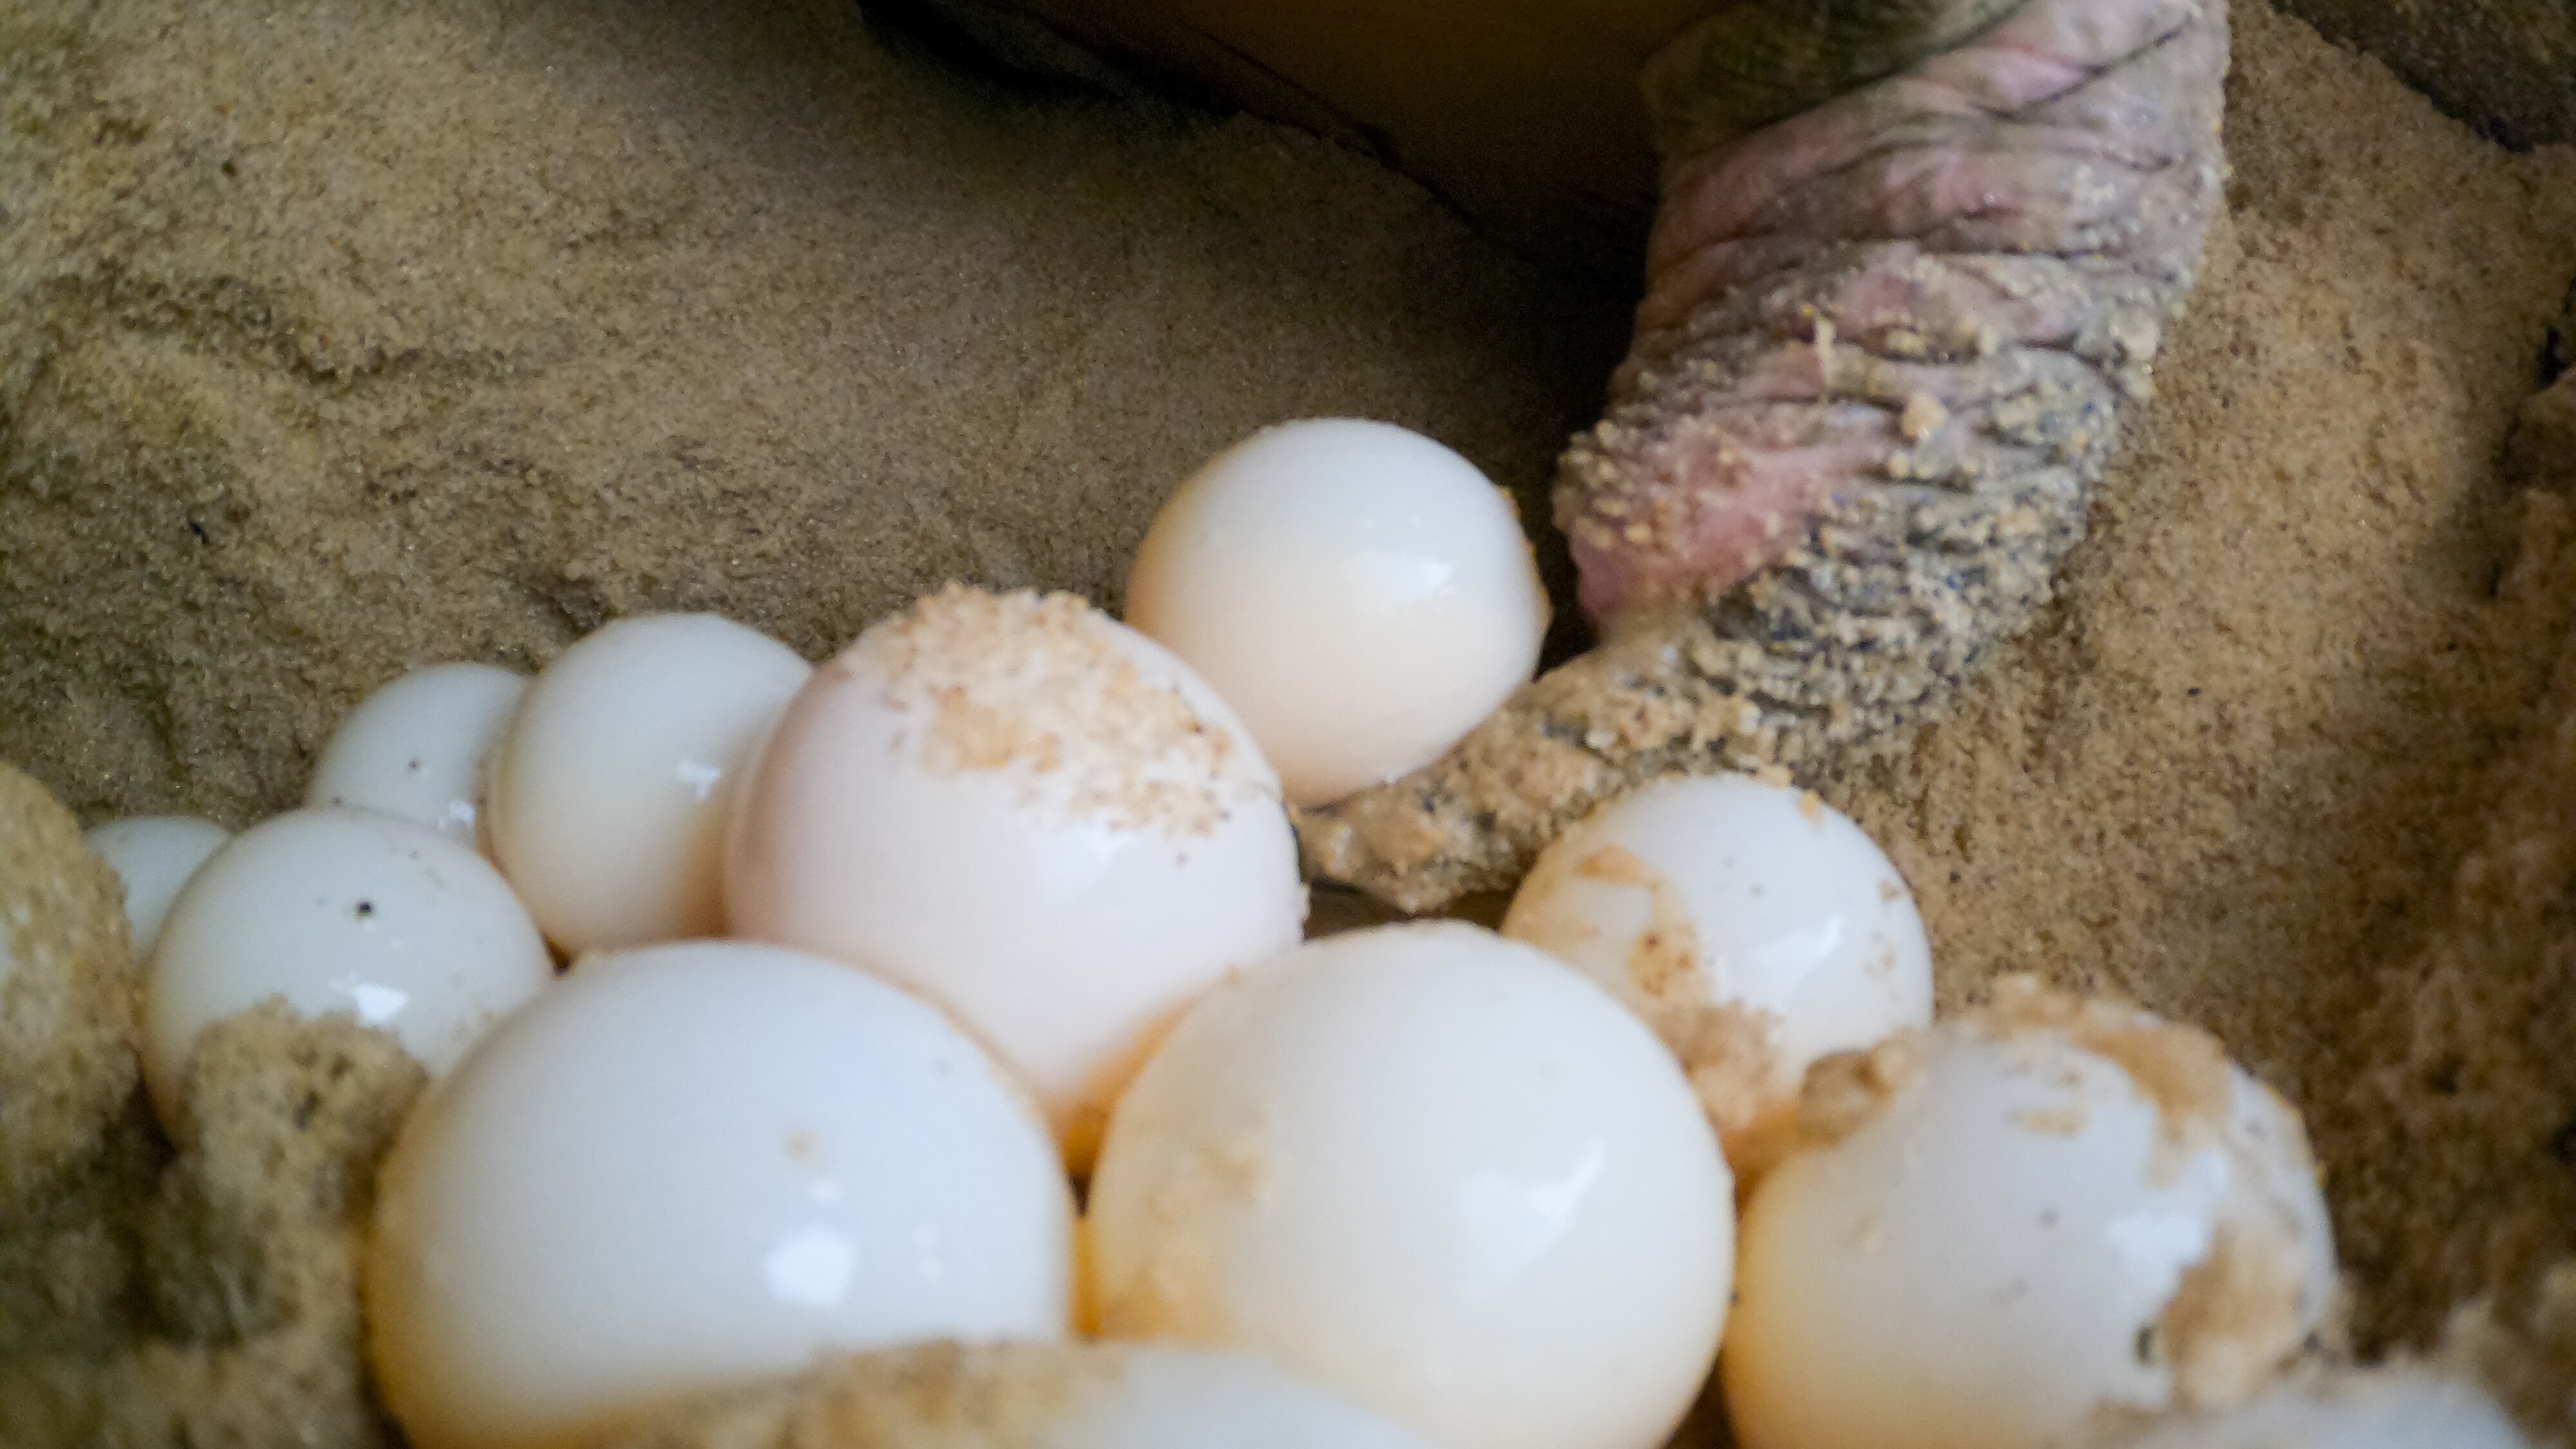 Turtle eggs being laid inside a nest. (National Geographic for Disney+/Cristian Dimitrius )